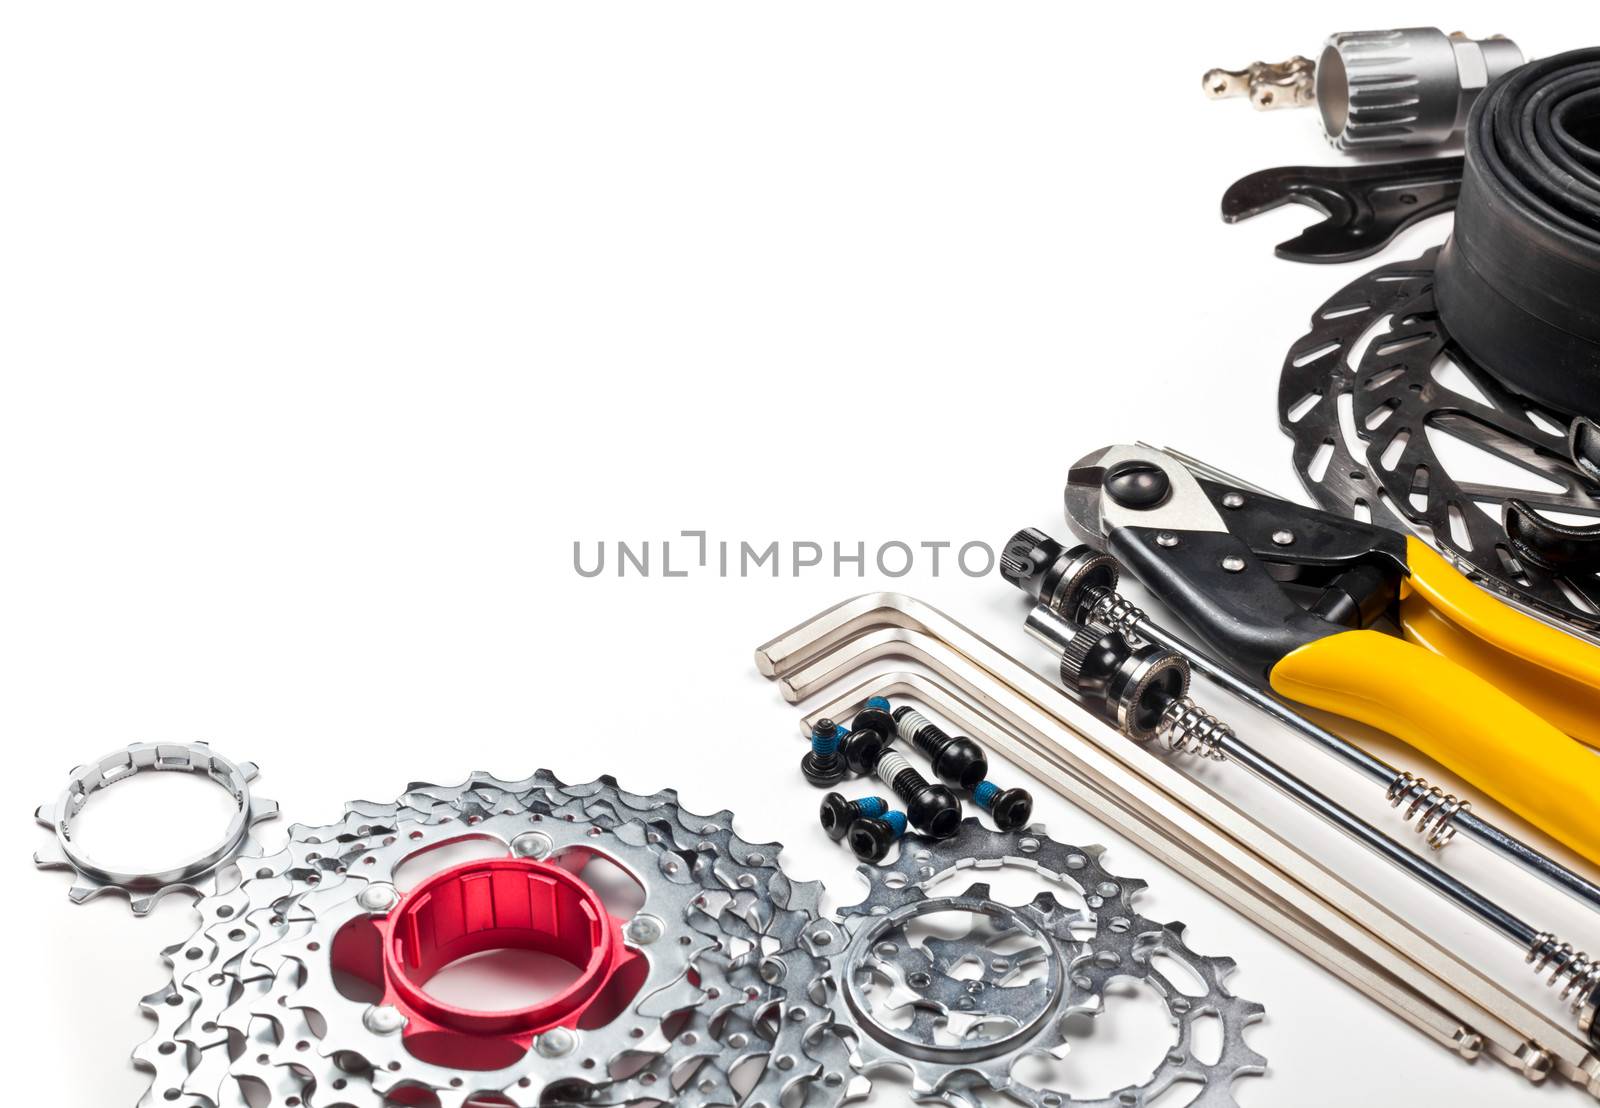 Mountain bike tools and spares on white background